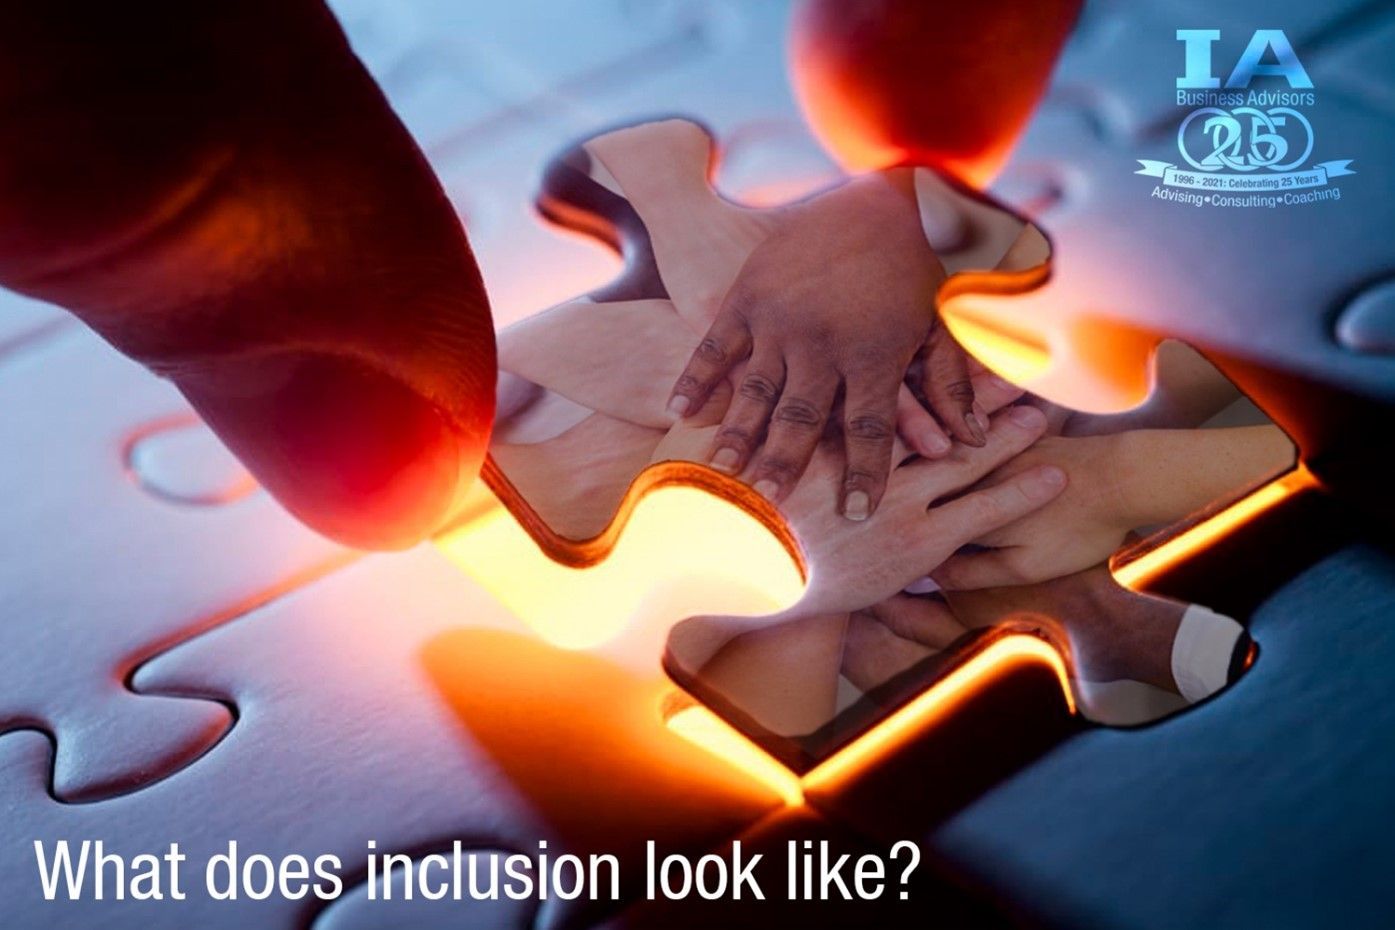 WHAT DOES INCLUSION LOOK LIKE?